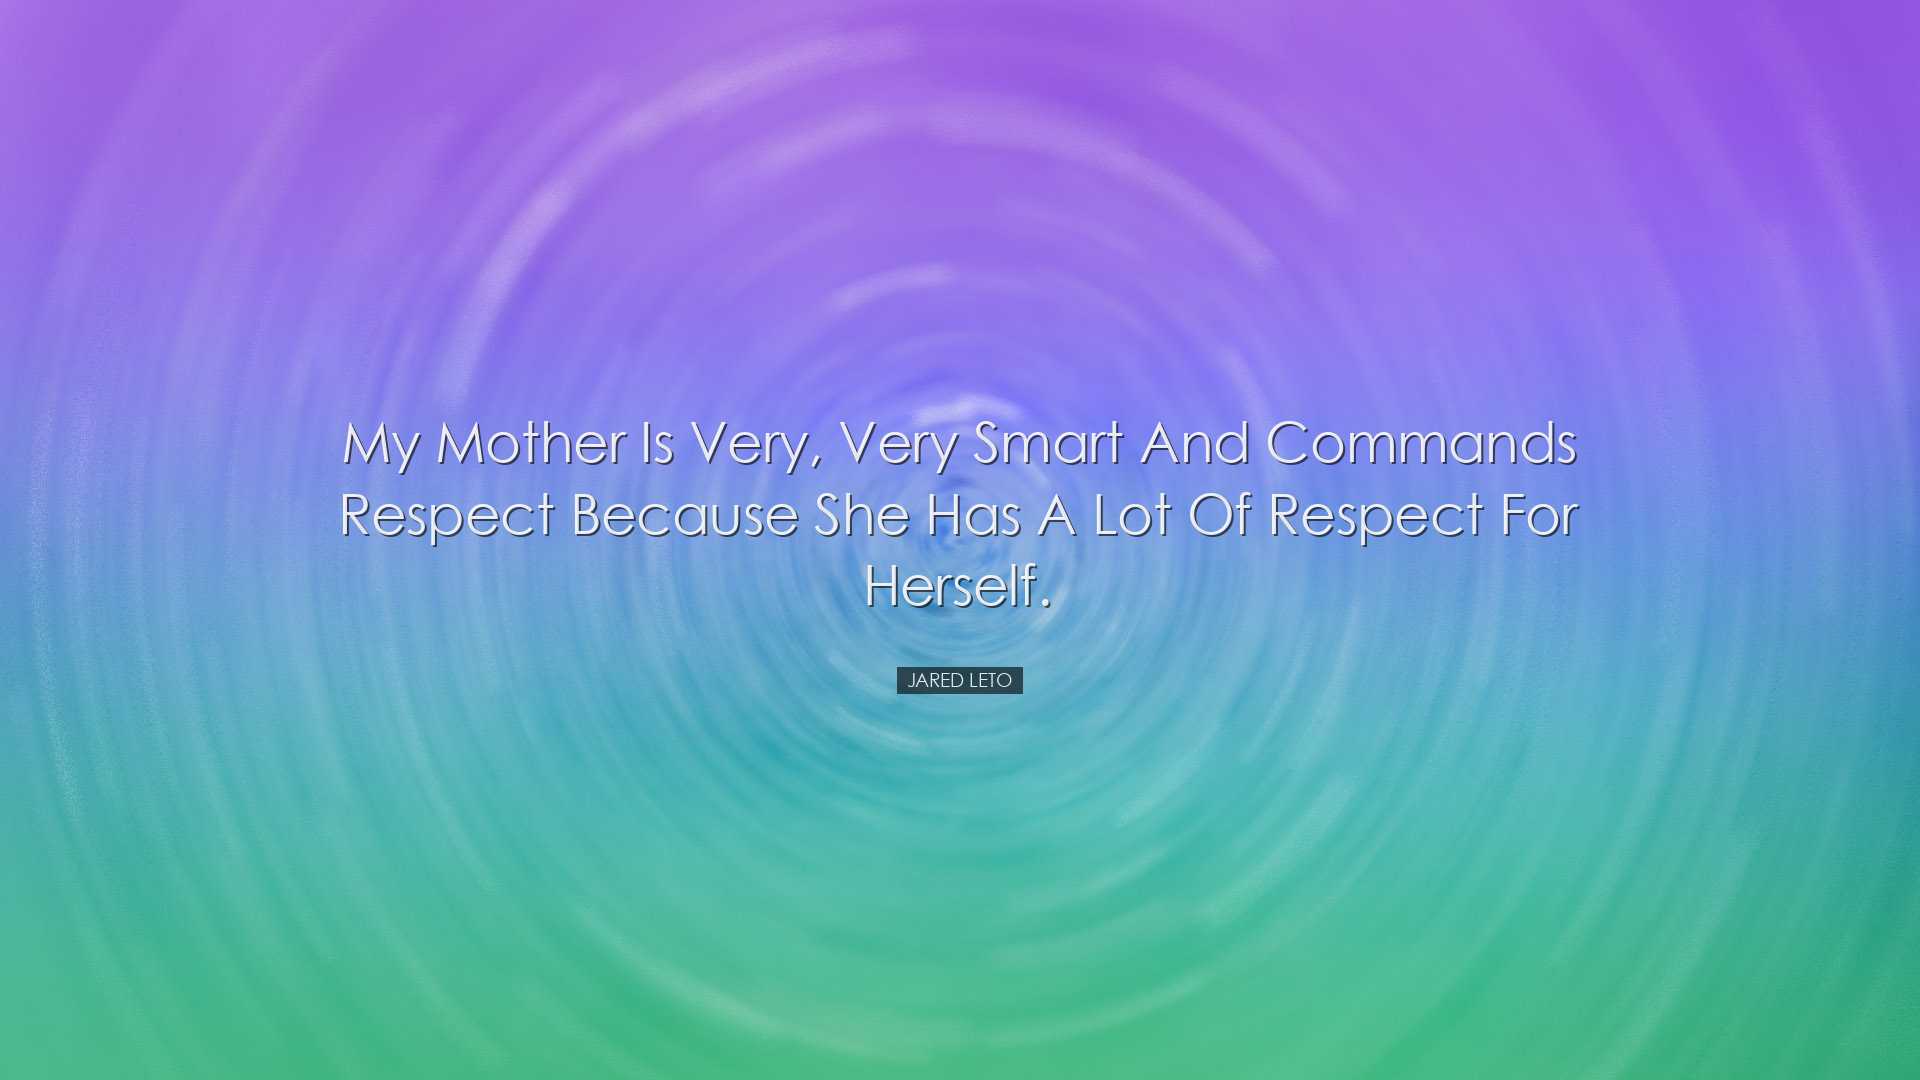 My mother is very, very smart and commands respect because she has